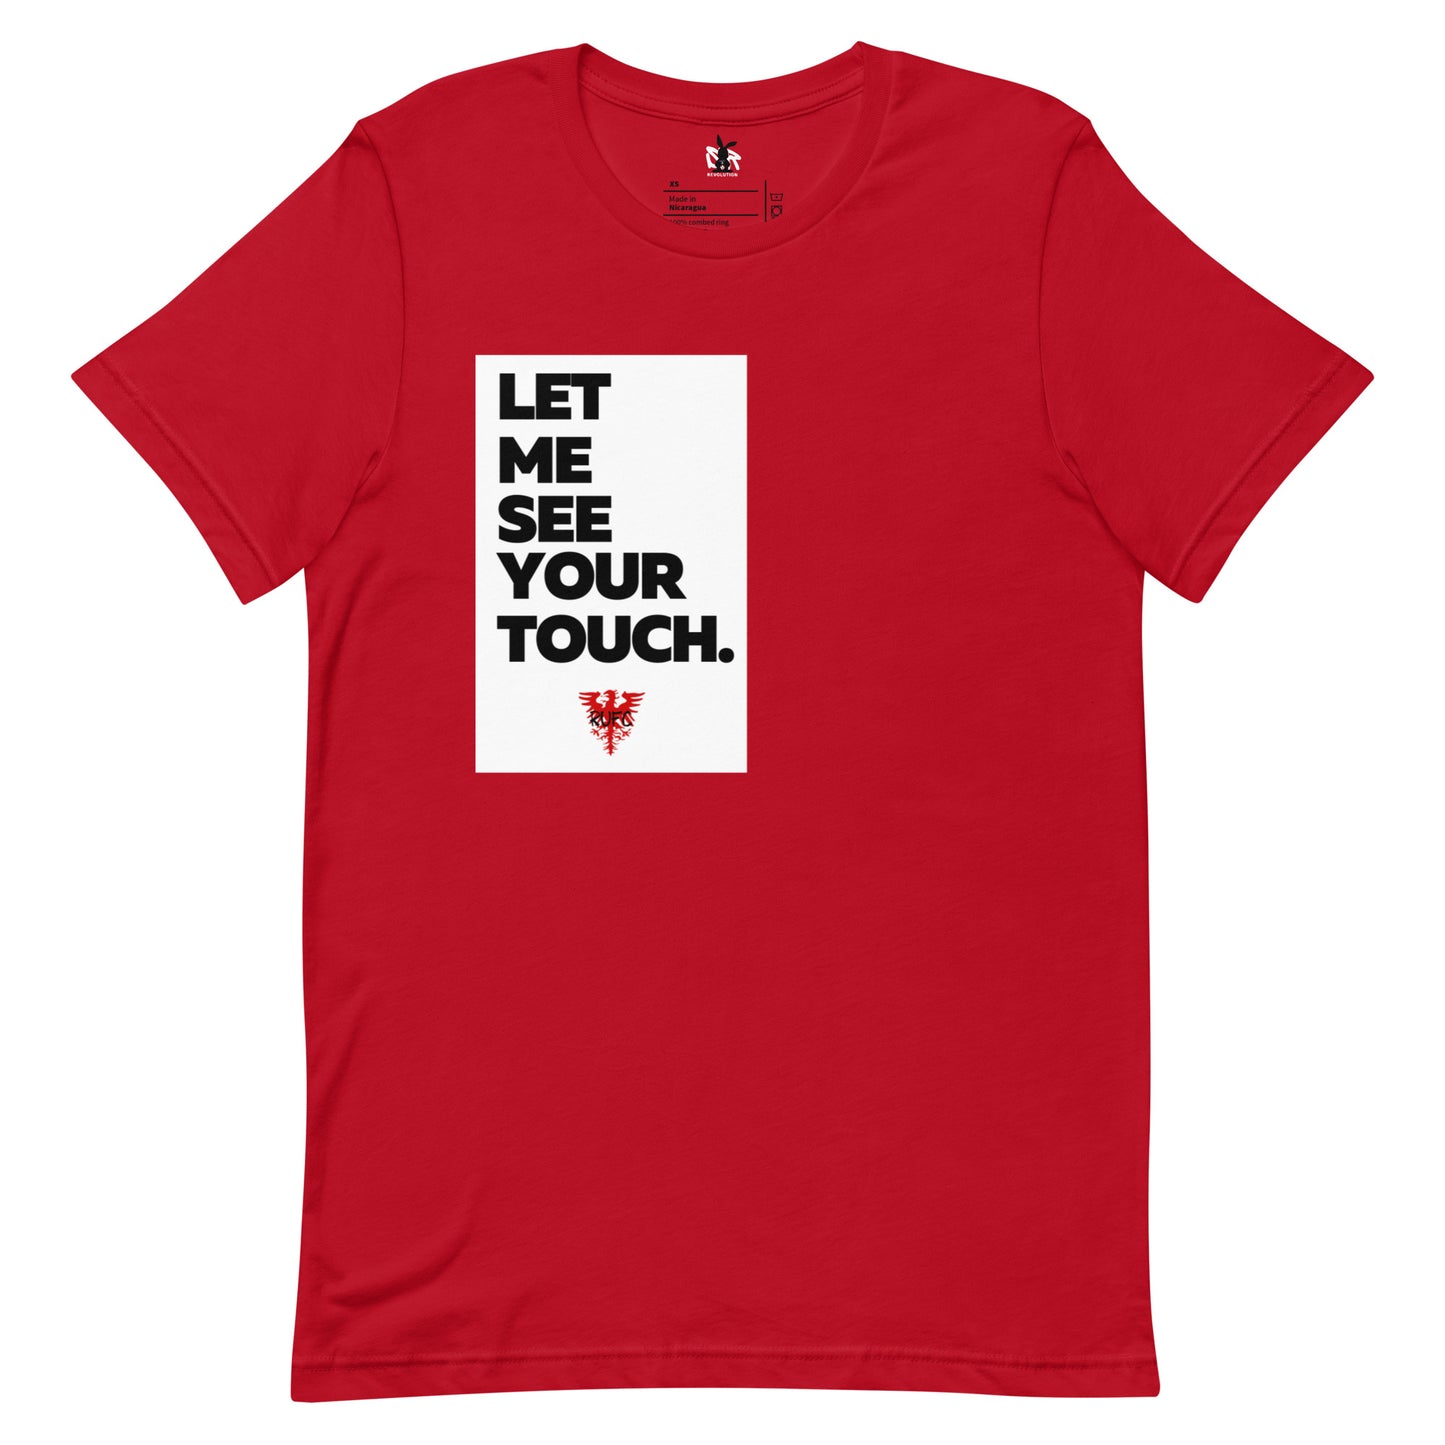 Let me see your touch T-shirt